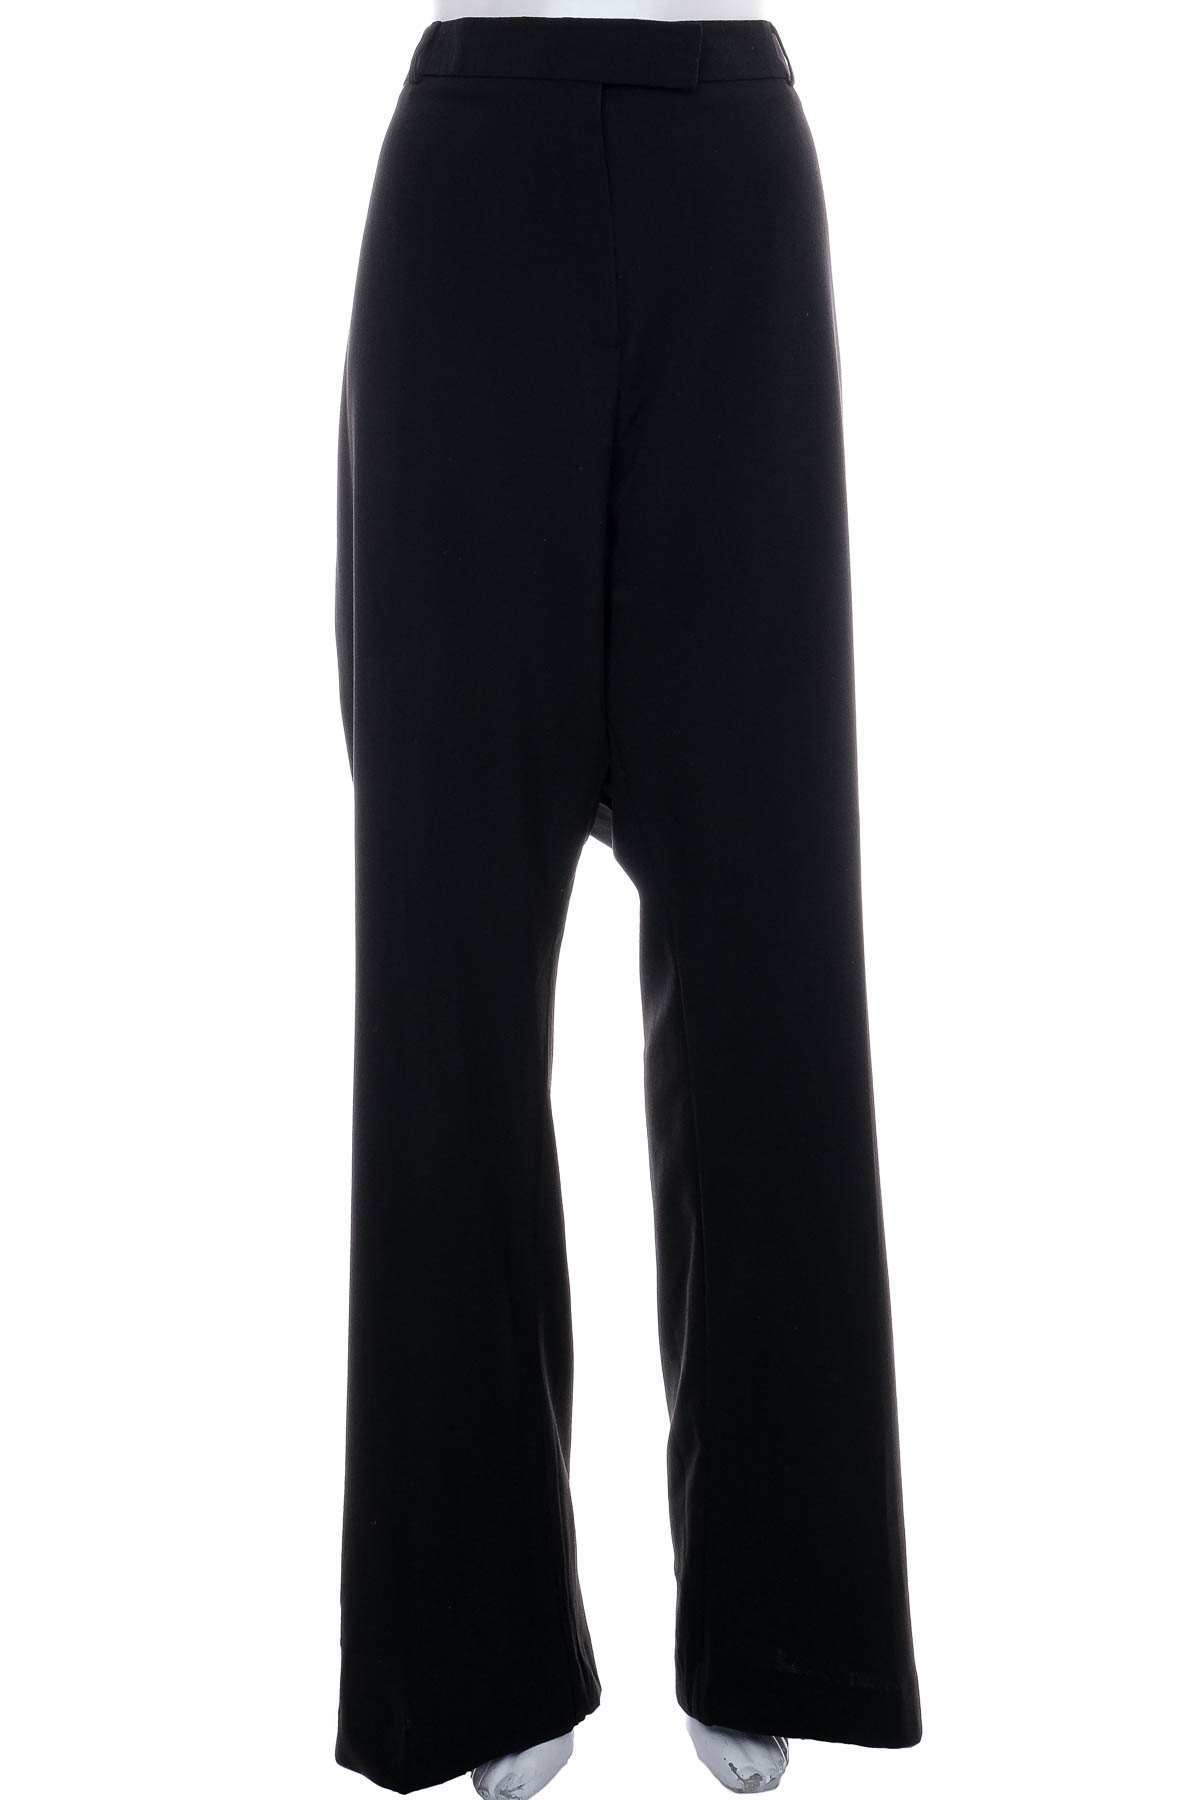 Women's trousers - Simply Be - 1